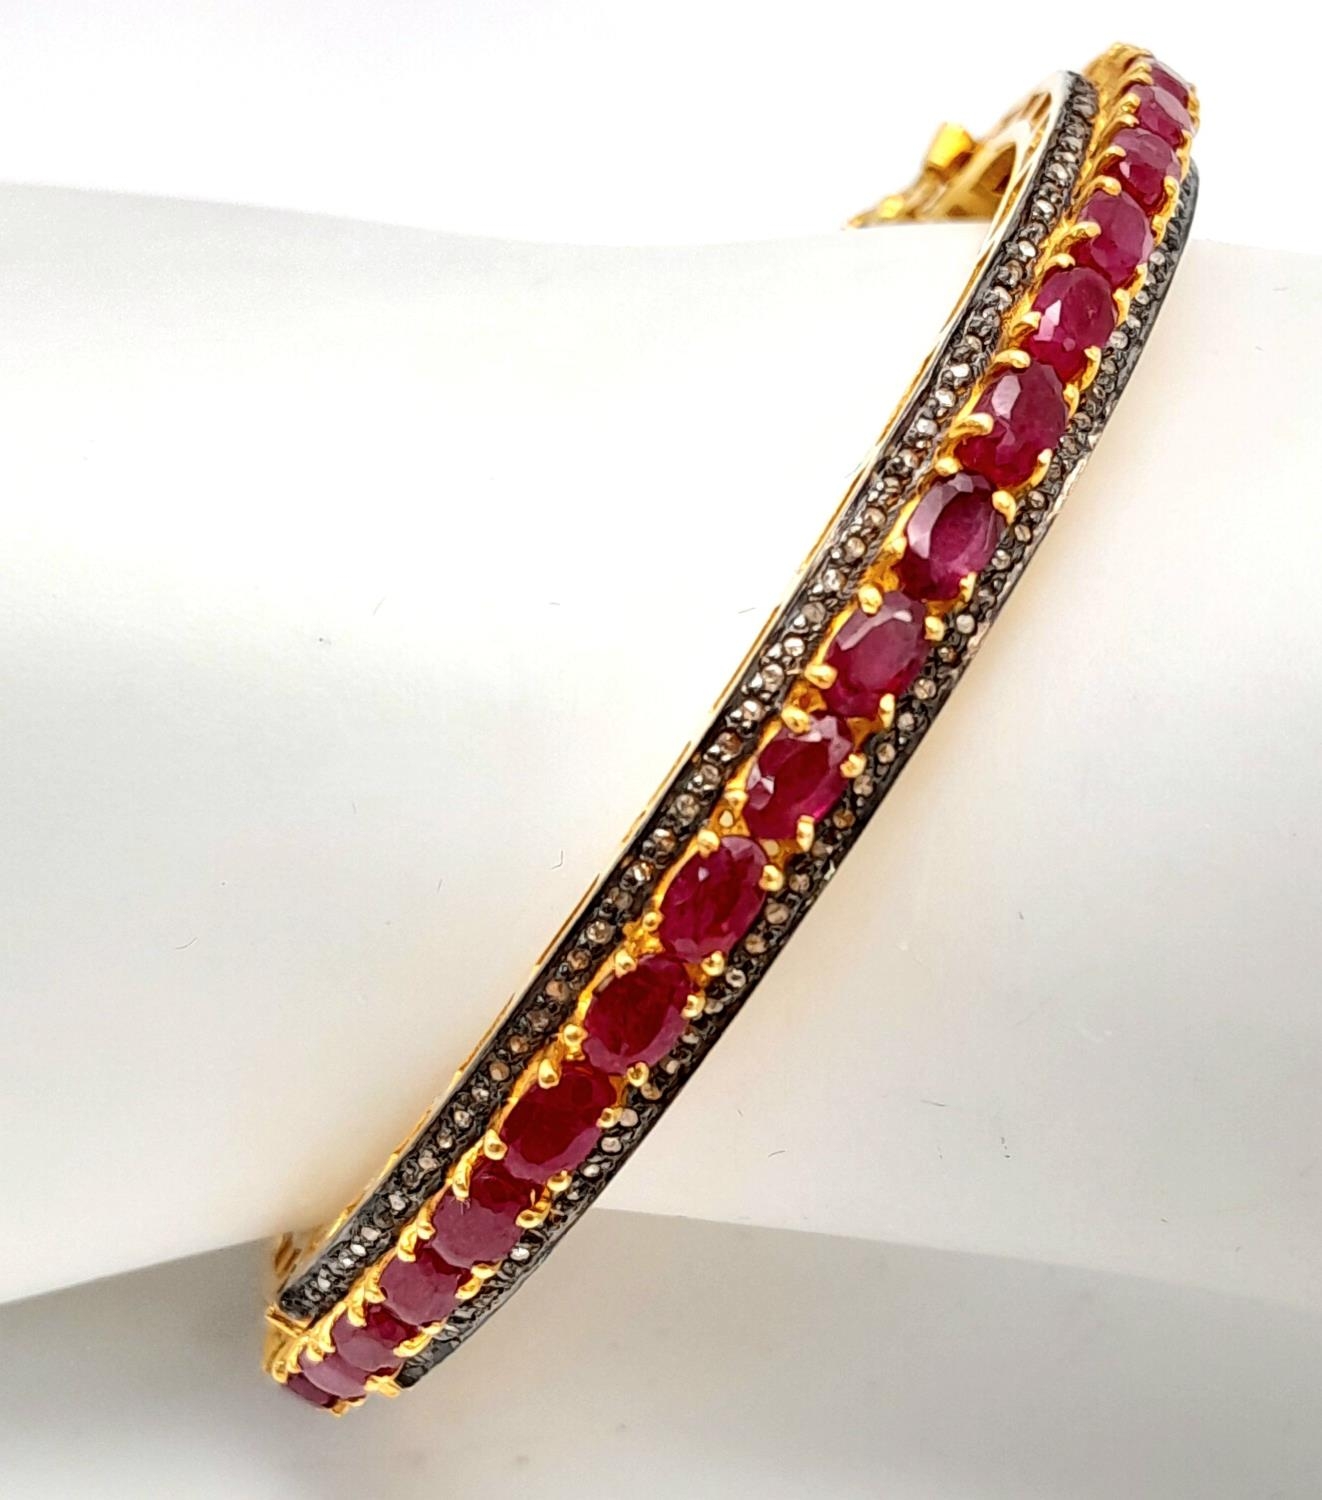 A Ruby Gemstone Bangle Bracelet with Old Cut Diamond Surround. Rubies - 12ctw. Set in 925 silver.